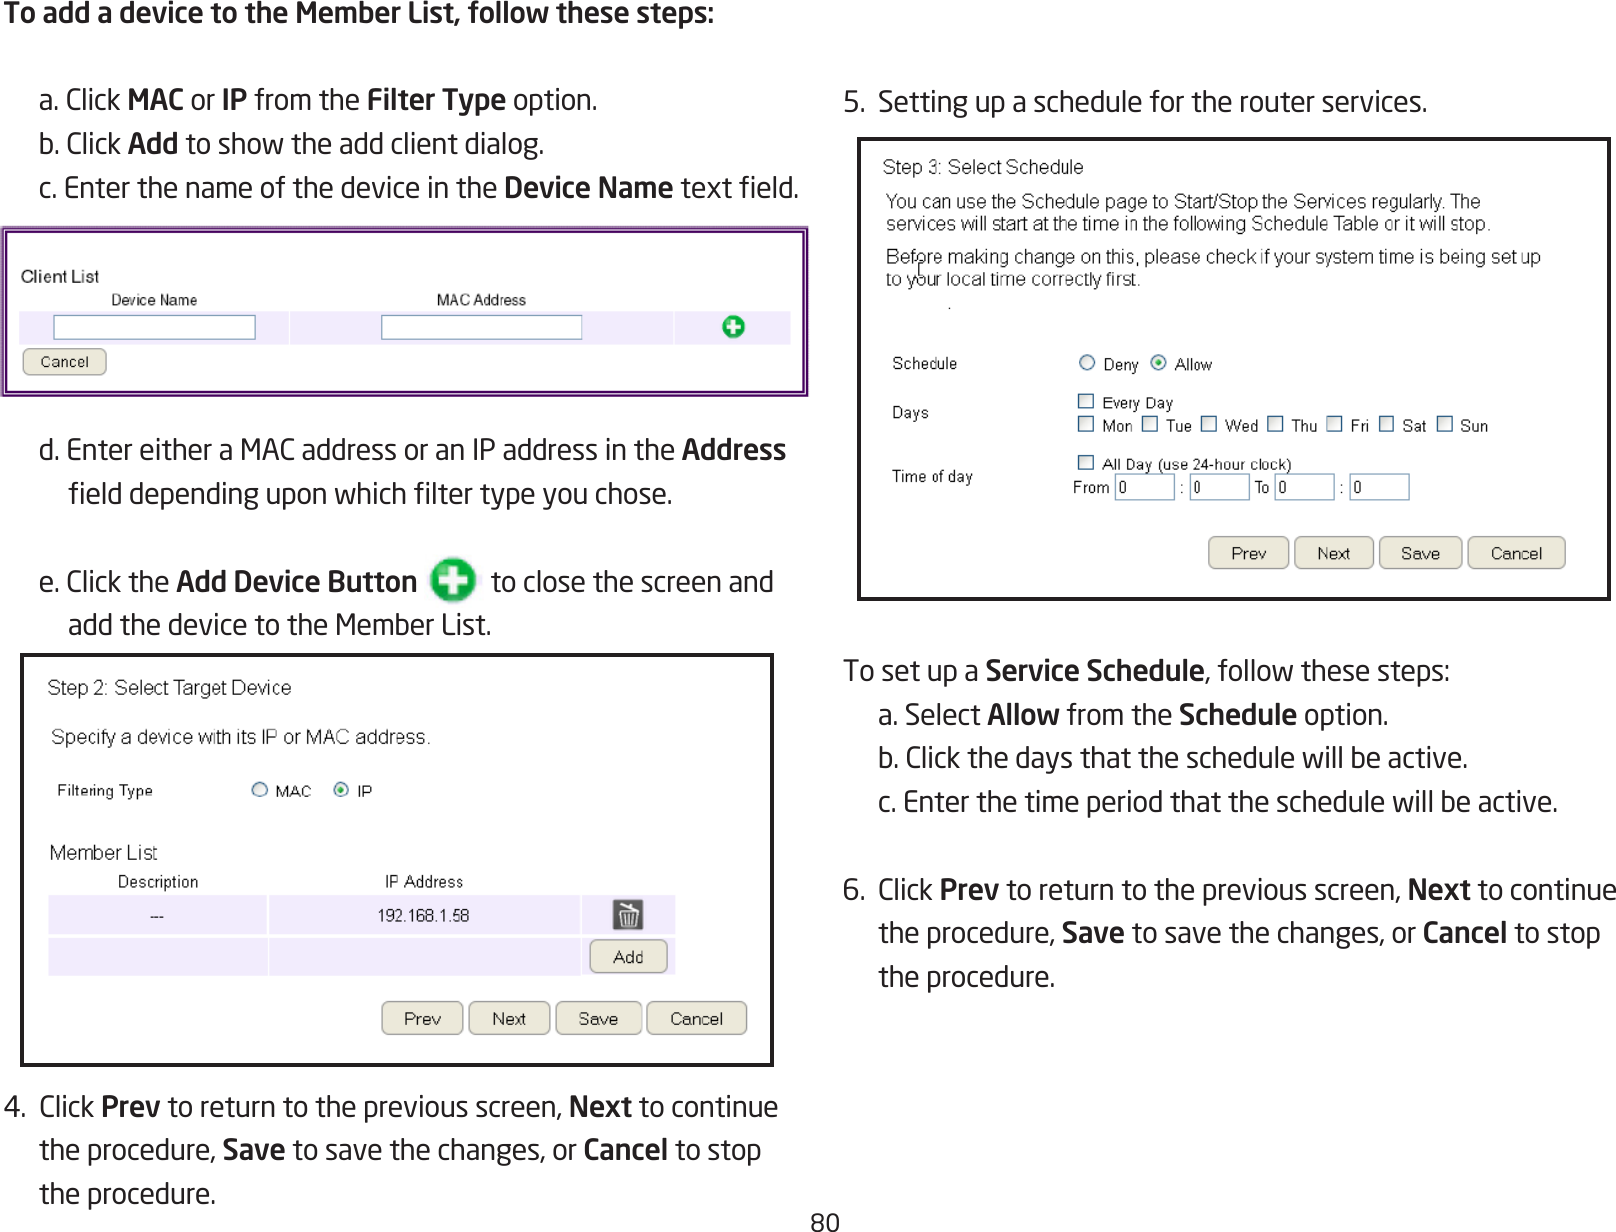 805.  Setting up a schedule for the router services.To set up a Service Schedule,followthesesteps:  a. Select Allow from the Schedule option. b.Clickthedaysthattheschedulewillbeactive. c.Enterthetimeperiodthattheschedulewillbeactive.6.ClickPrev to return to the previous screen, Next to continue  the procedure, Save to save the changes, or Cancel to stop    the procedure.To add a device to the Member List, follow these steps: a.ClickMAC or IP from the Filter Type option. b.ClickAddtoshowtheaddclientdialog.  c. Enter the name of the device in the Device Nametexteld. d.EntereitheraMACaddressoranIPaddressintheAddress    elddependinguponwhichltertypeyouchose. e.ClicktheAdd Device Button           to close the screen and    addthedevicetotheMemberList.4.ClickPrev to return to the previous screen, Next to continue  the procedure, Save to save the changes, or Cancel to stop  the procedure.